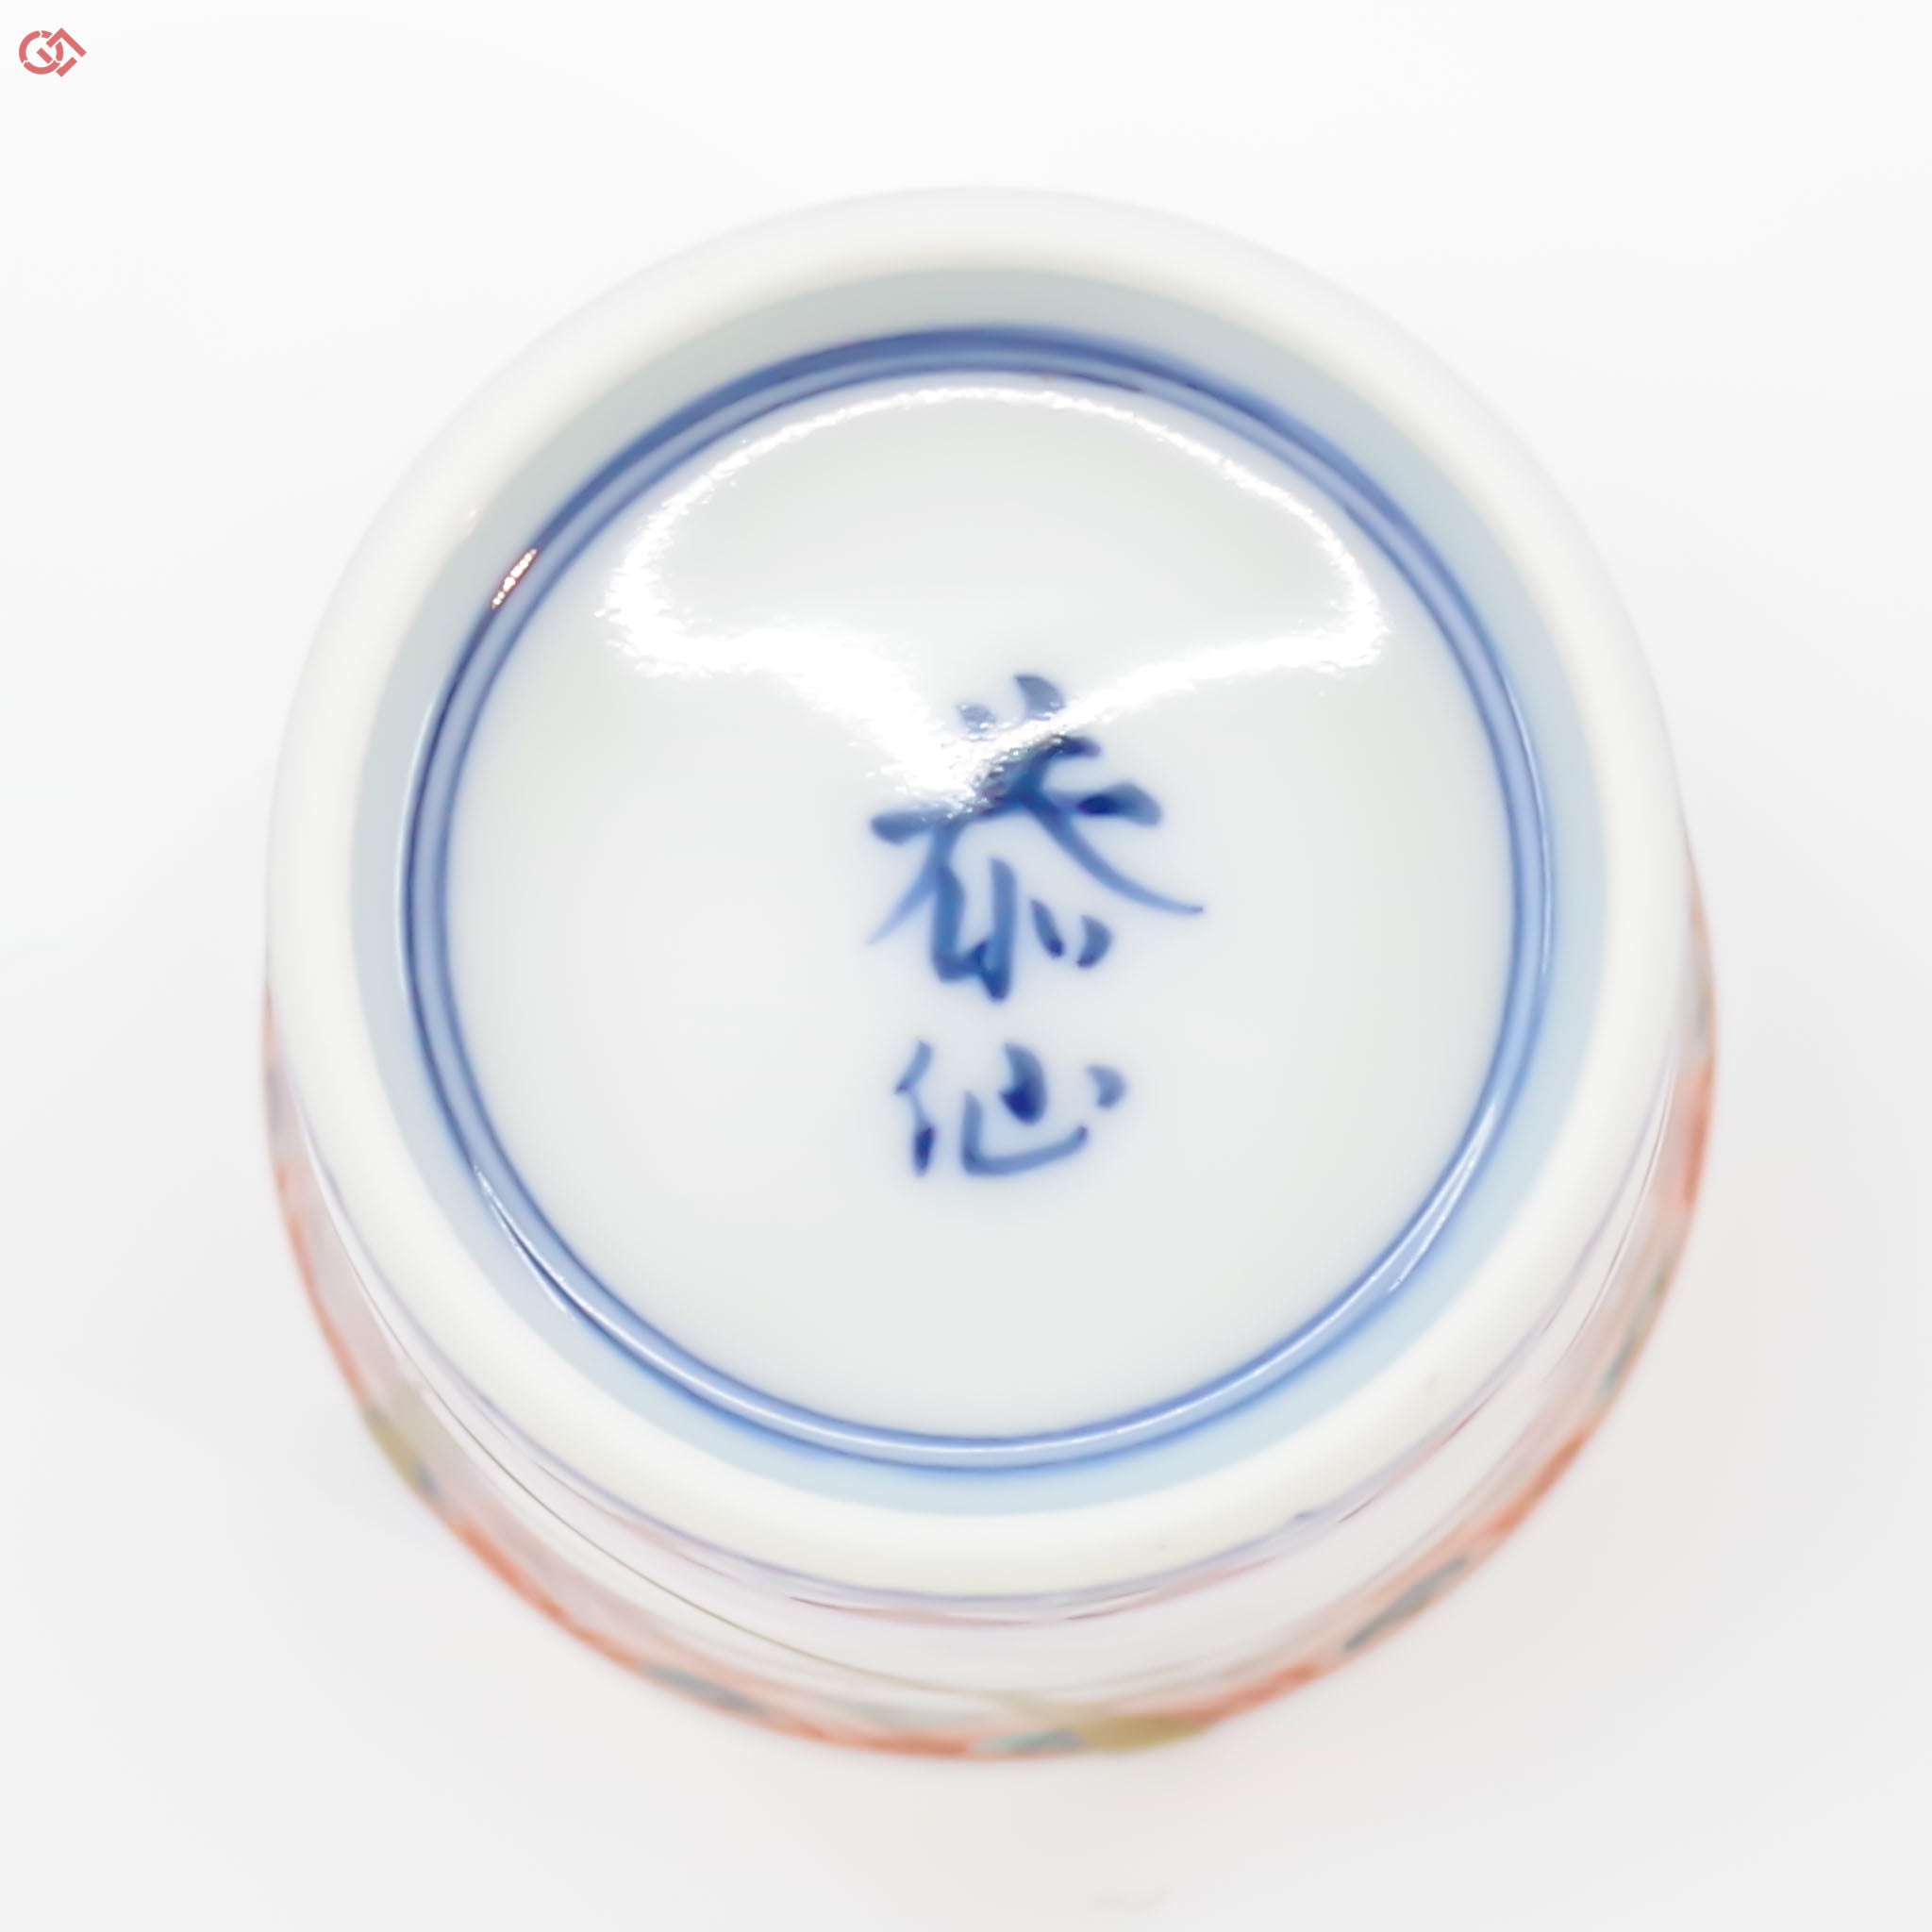 Image of the bottom of Authentic Kintsugi pottery